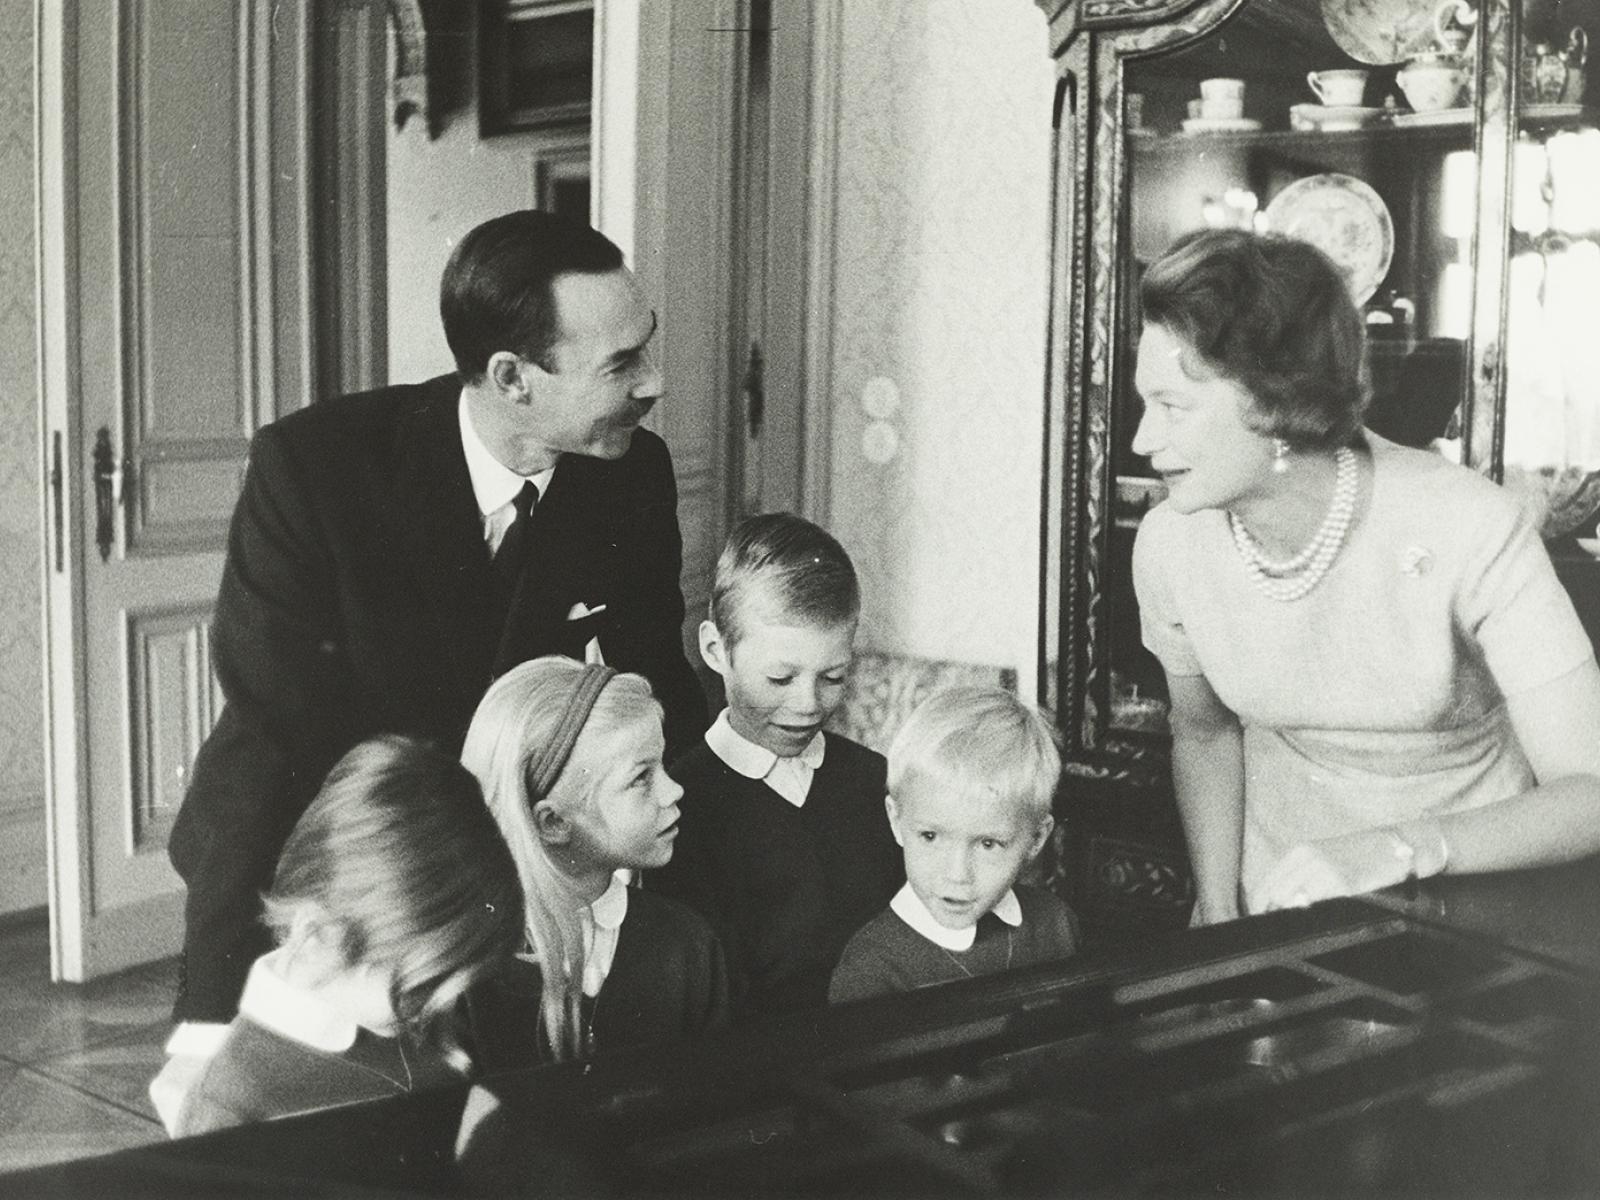 The Grand Ducal Family in 1962